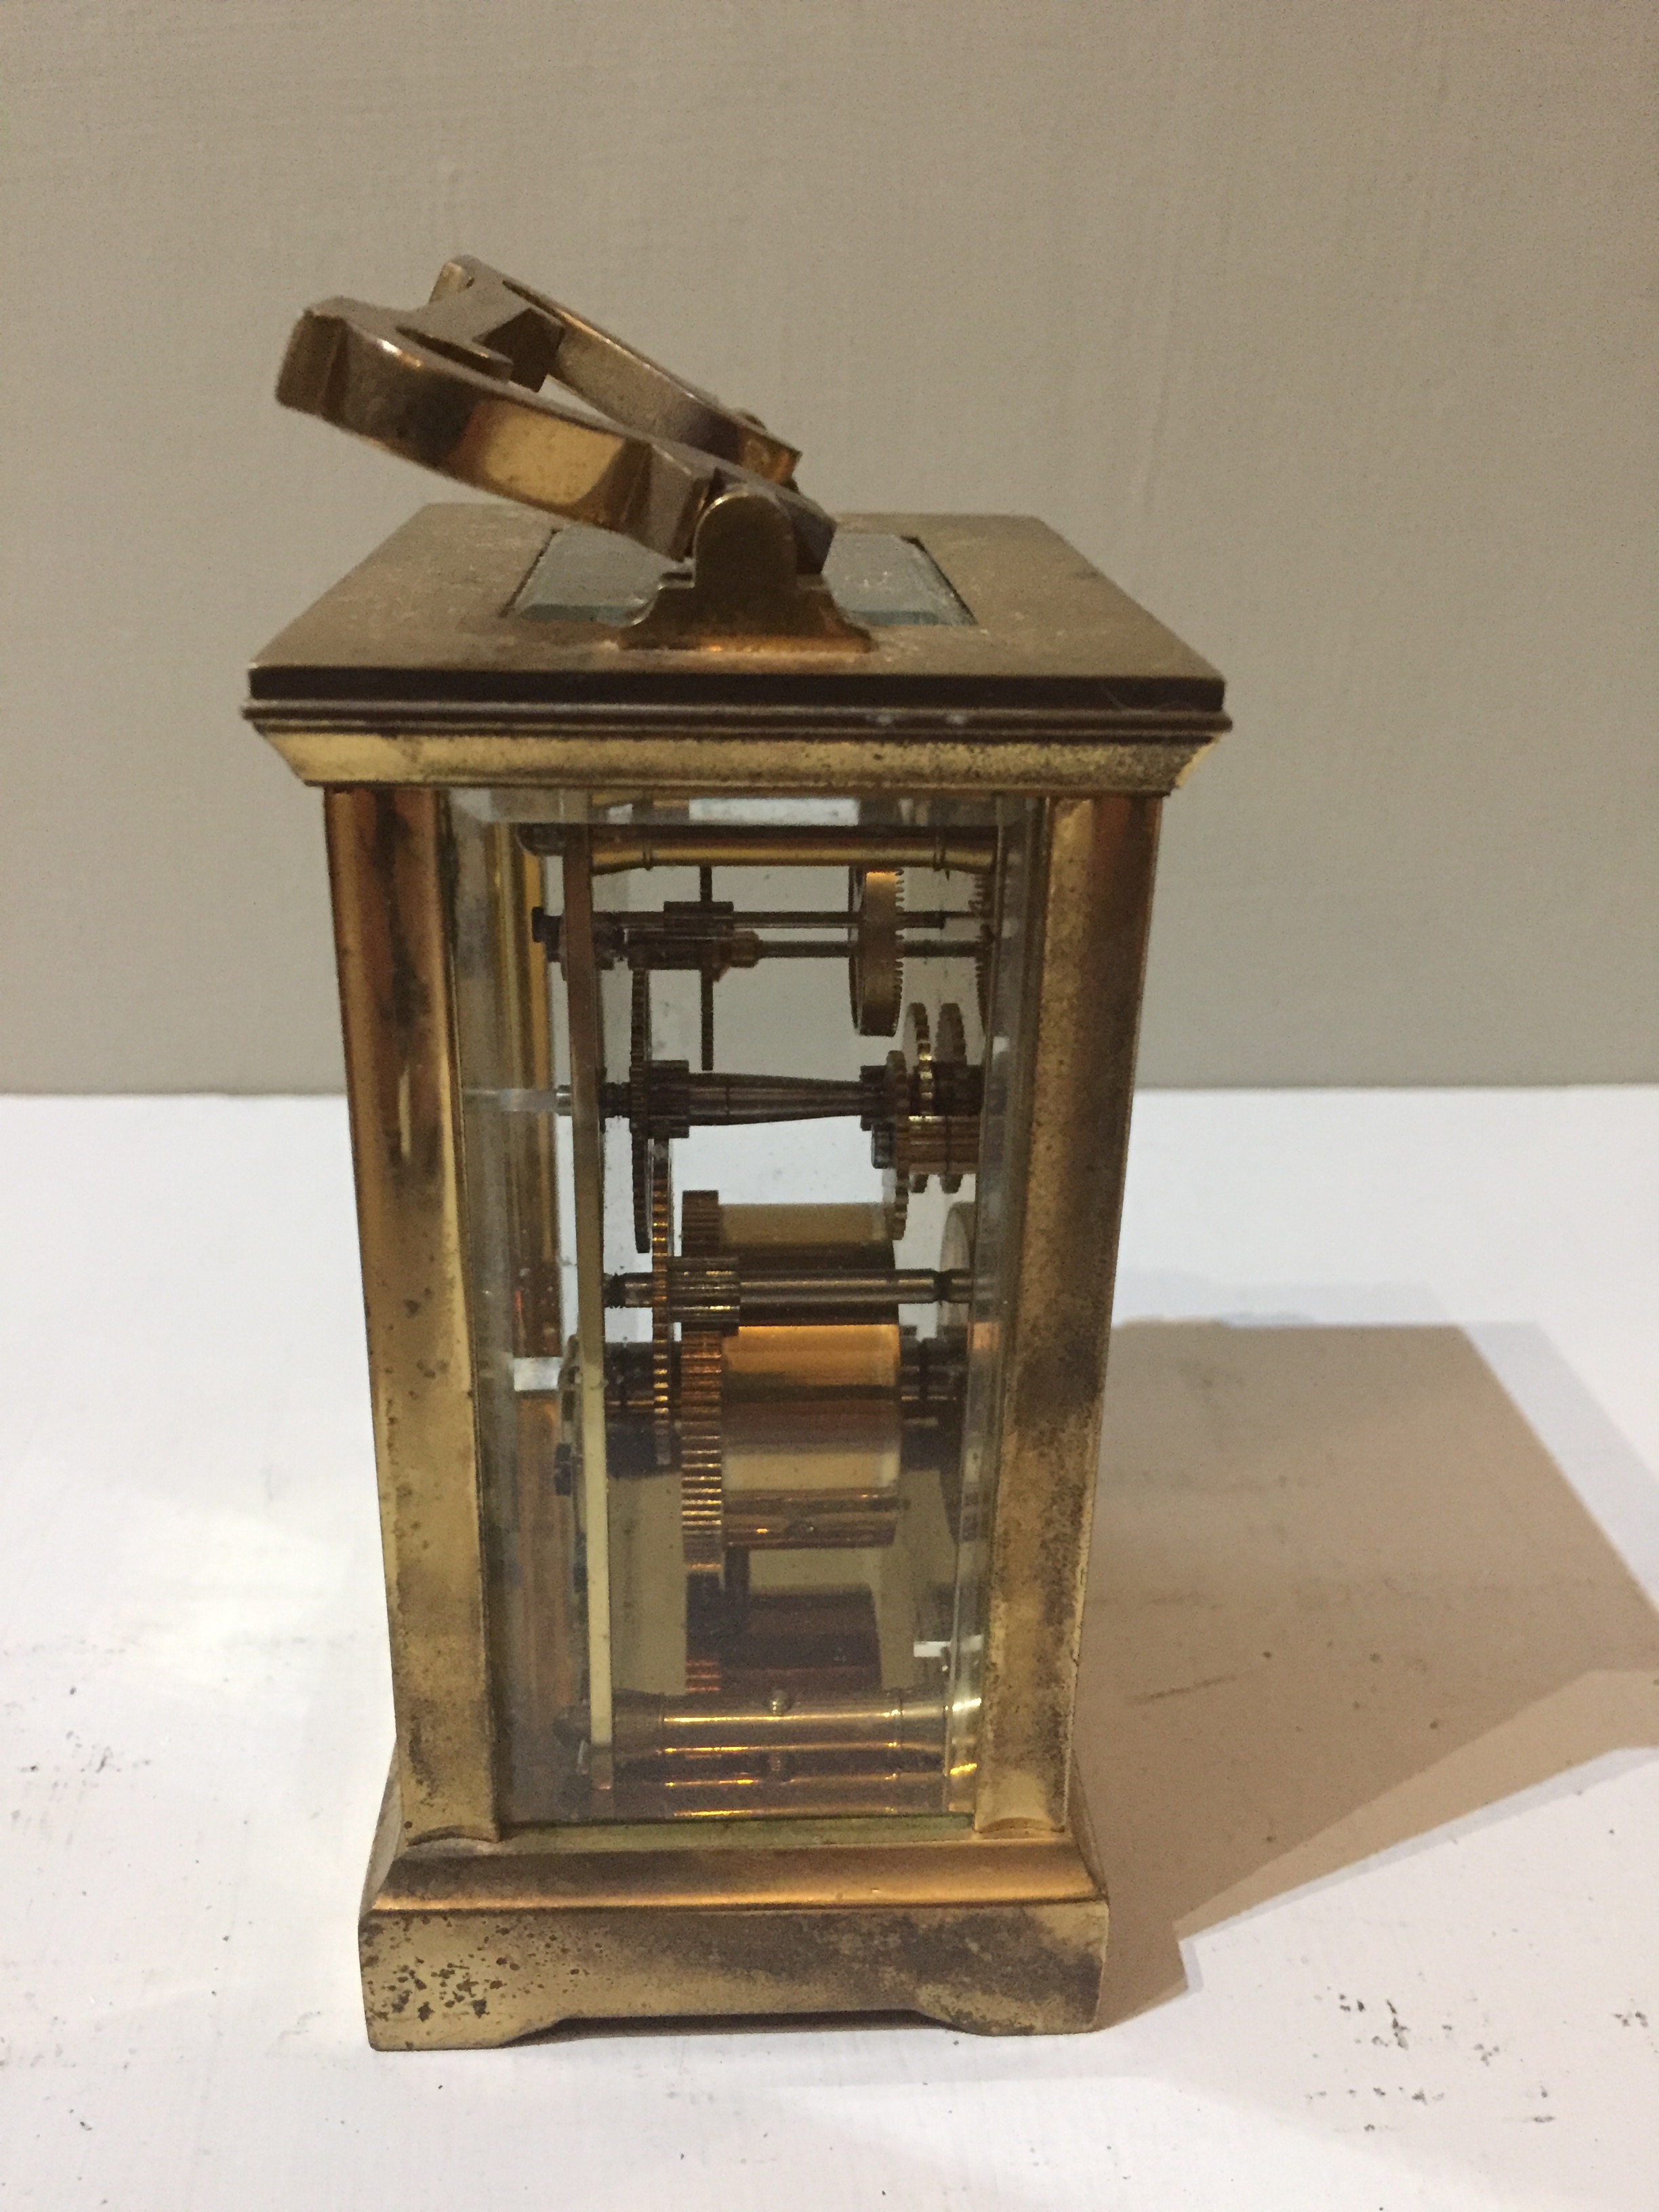 A LATE 19TH/20TH CENTURY BRASS CASED CARRIAGE CLOCK. (11.5cm x 6cm x 8cm) - Image 3 of 3